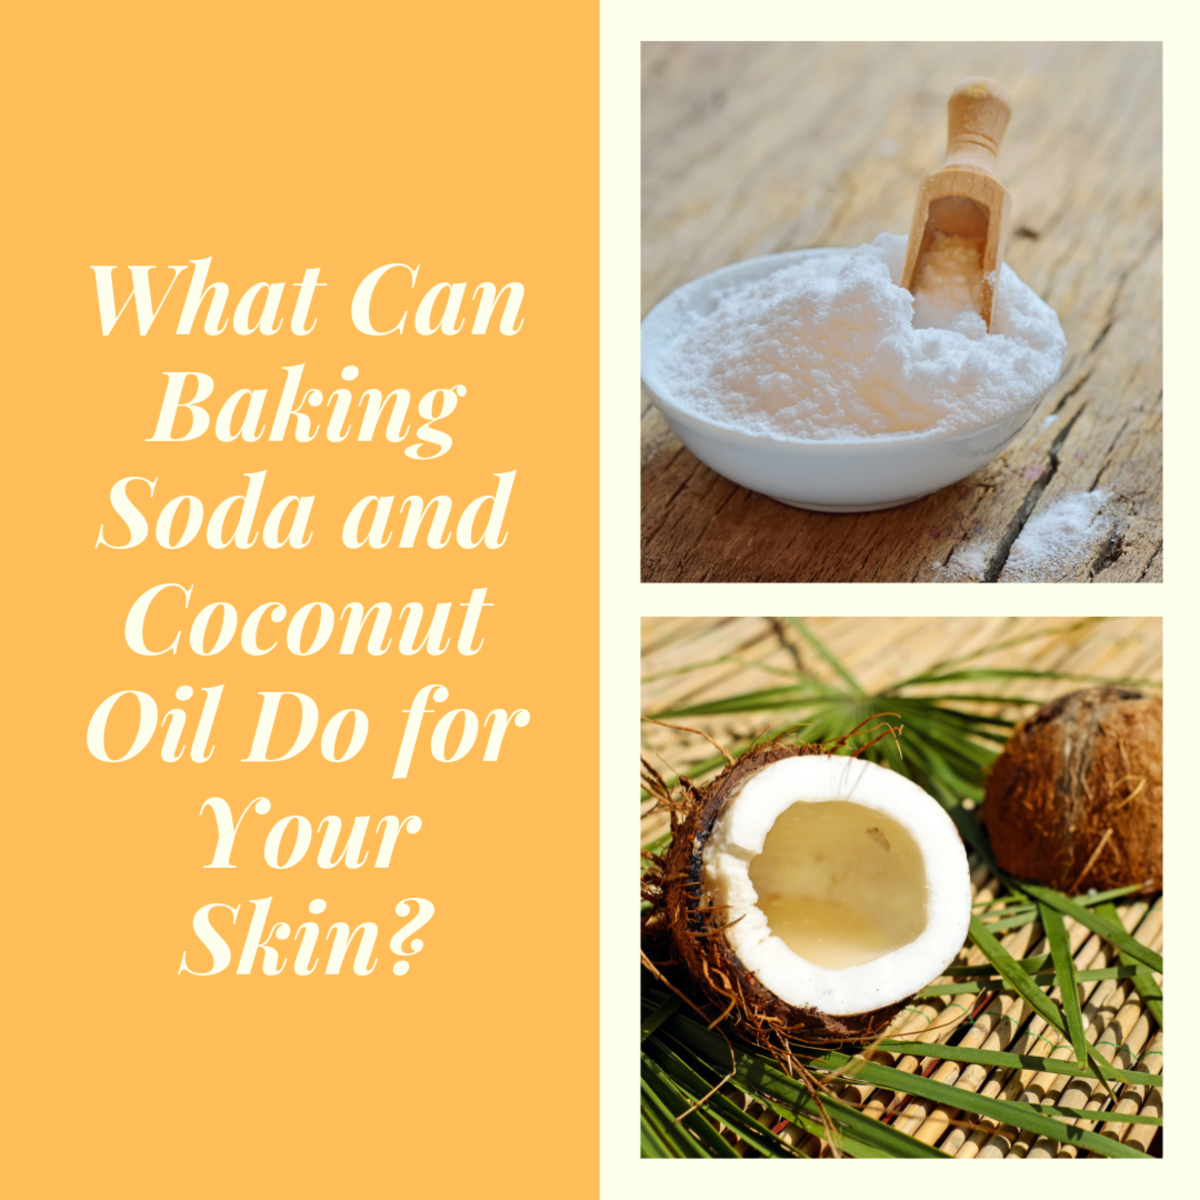 Baking soda and coconut oil are healthy alternatives to conventional beauty products.